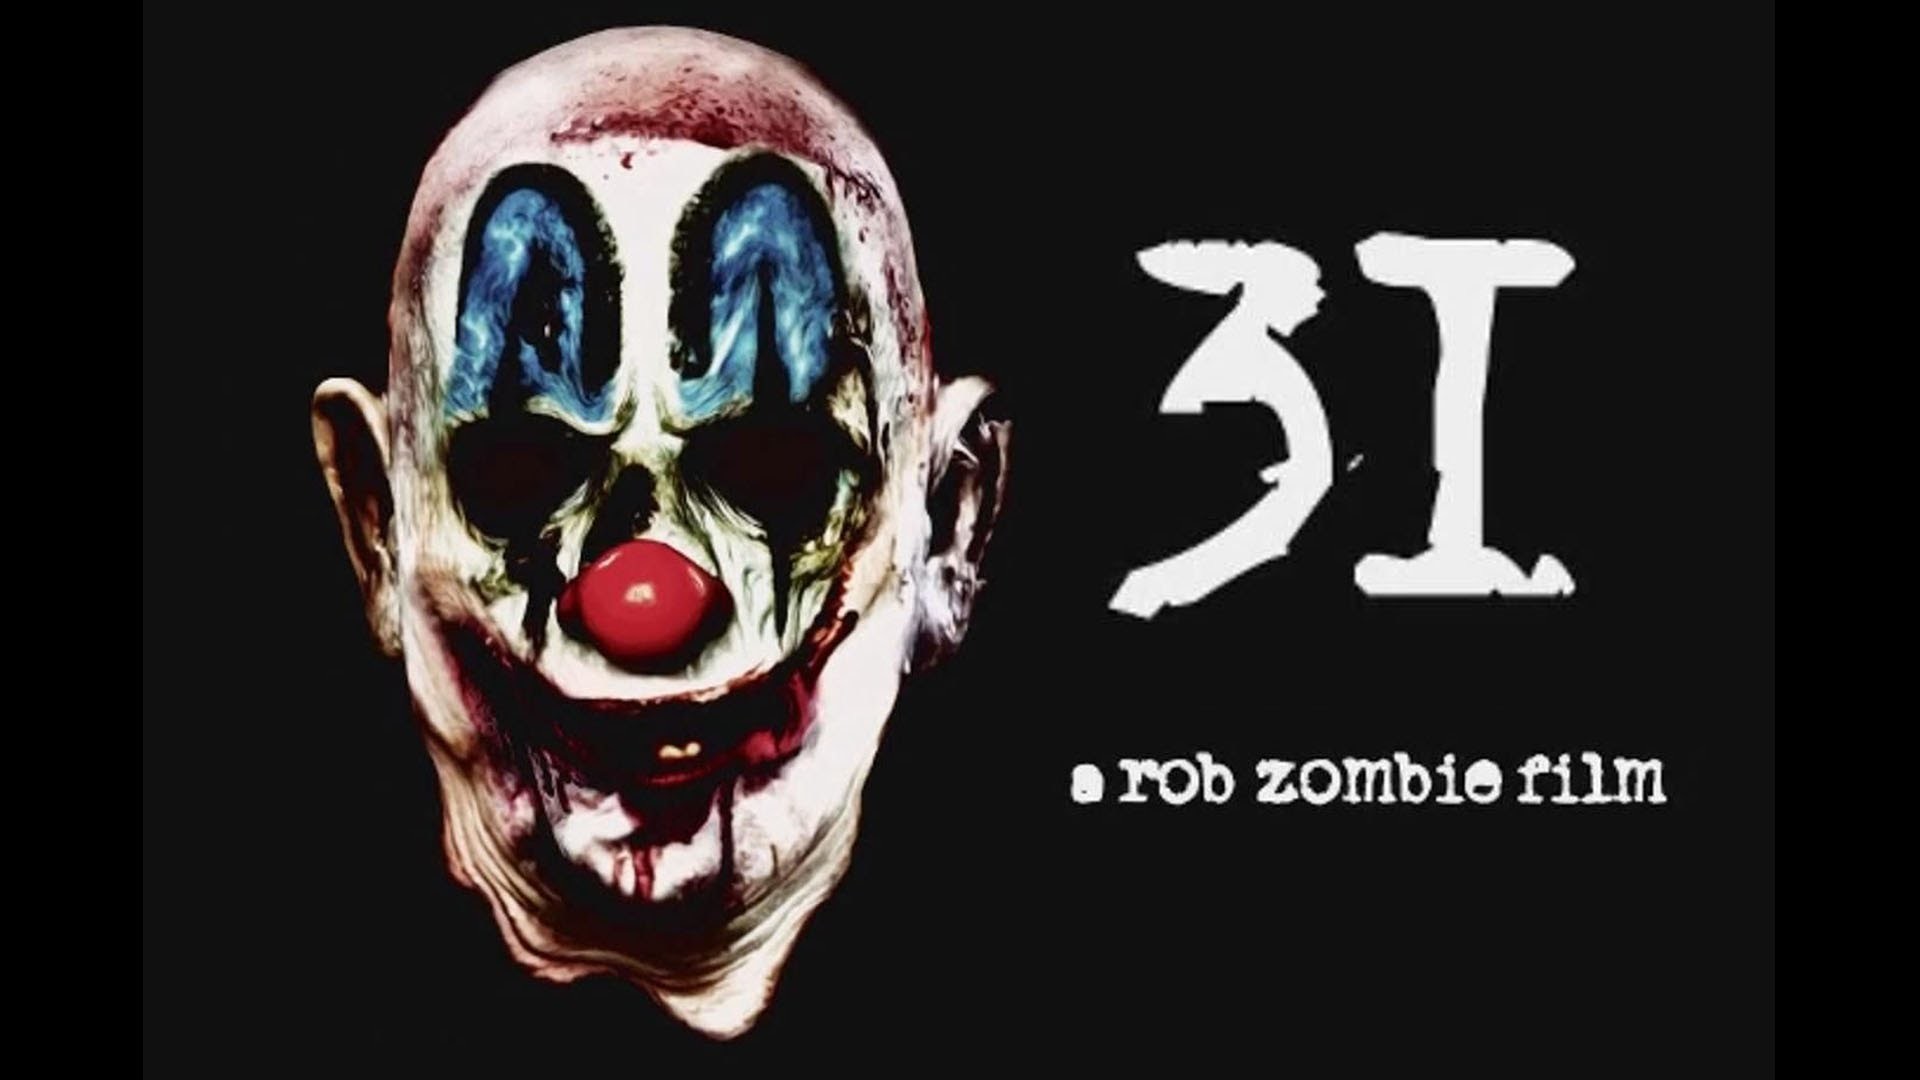 1920x1080  Rob Zombie's '31' Is a Crowd-Sourced Film; First Details!